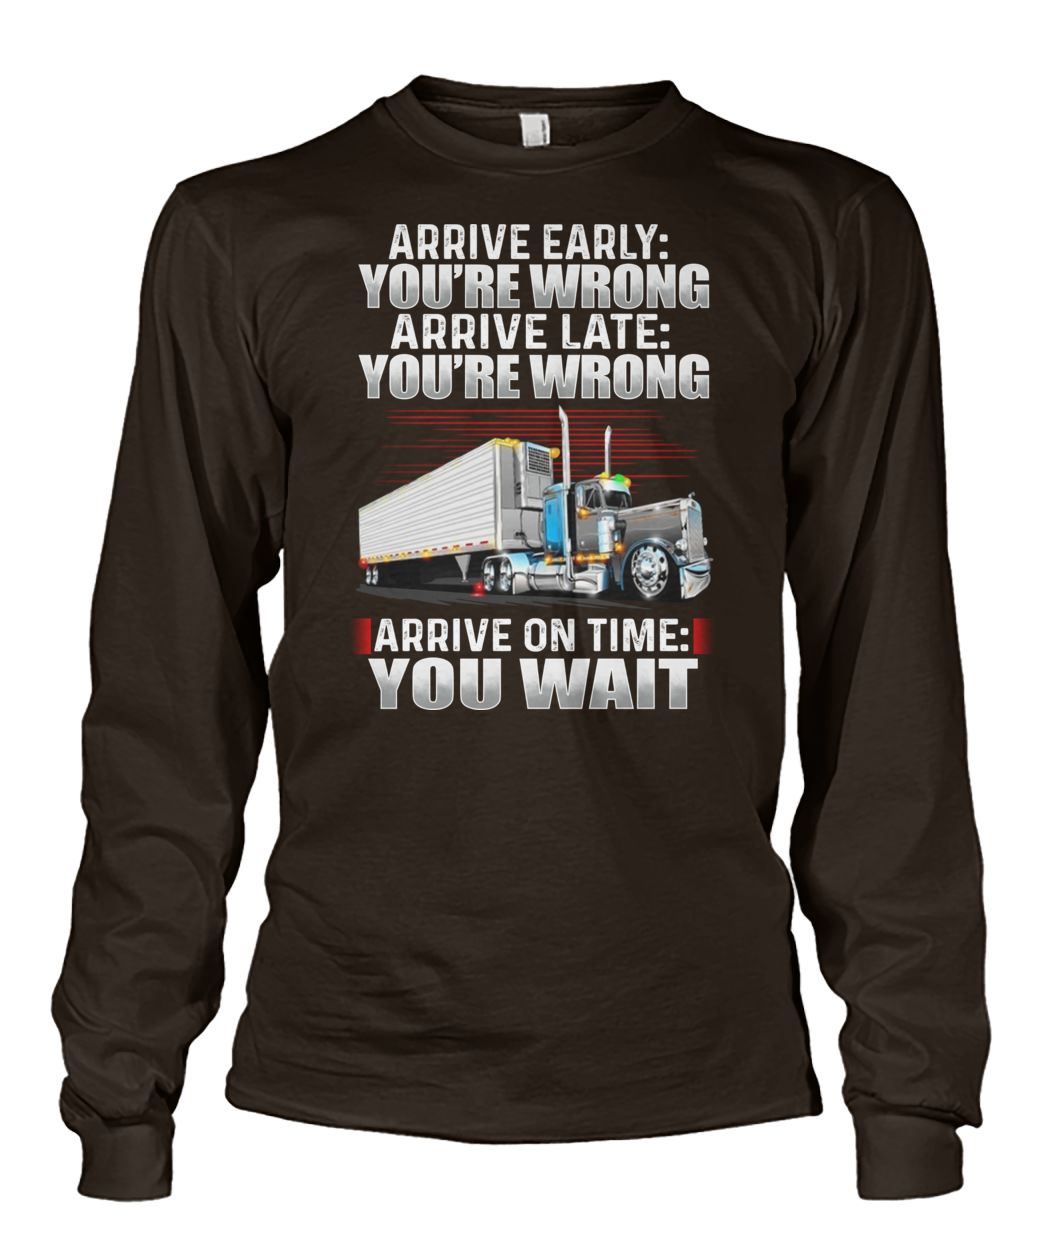 Truck arrive early you re wrong arrive late you're wrong arrive on time you wait unisex long sleeve